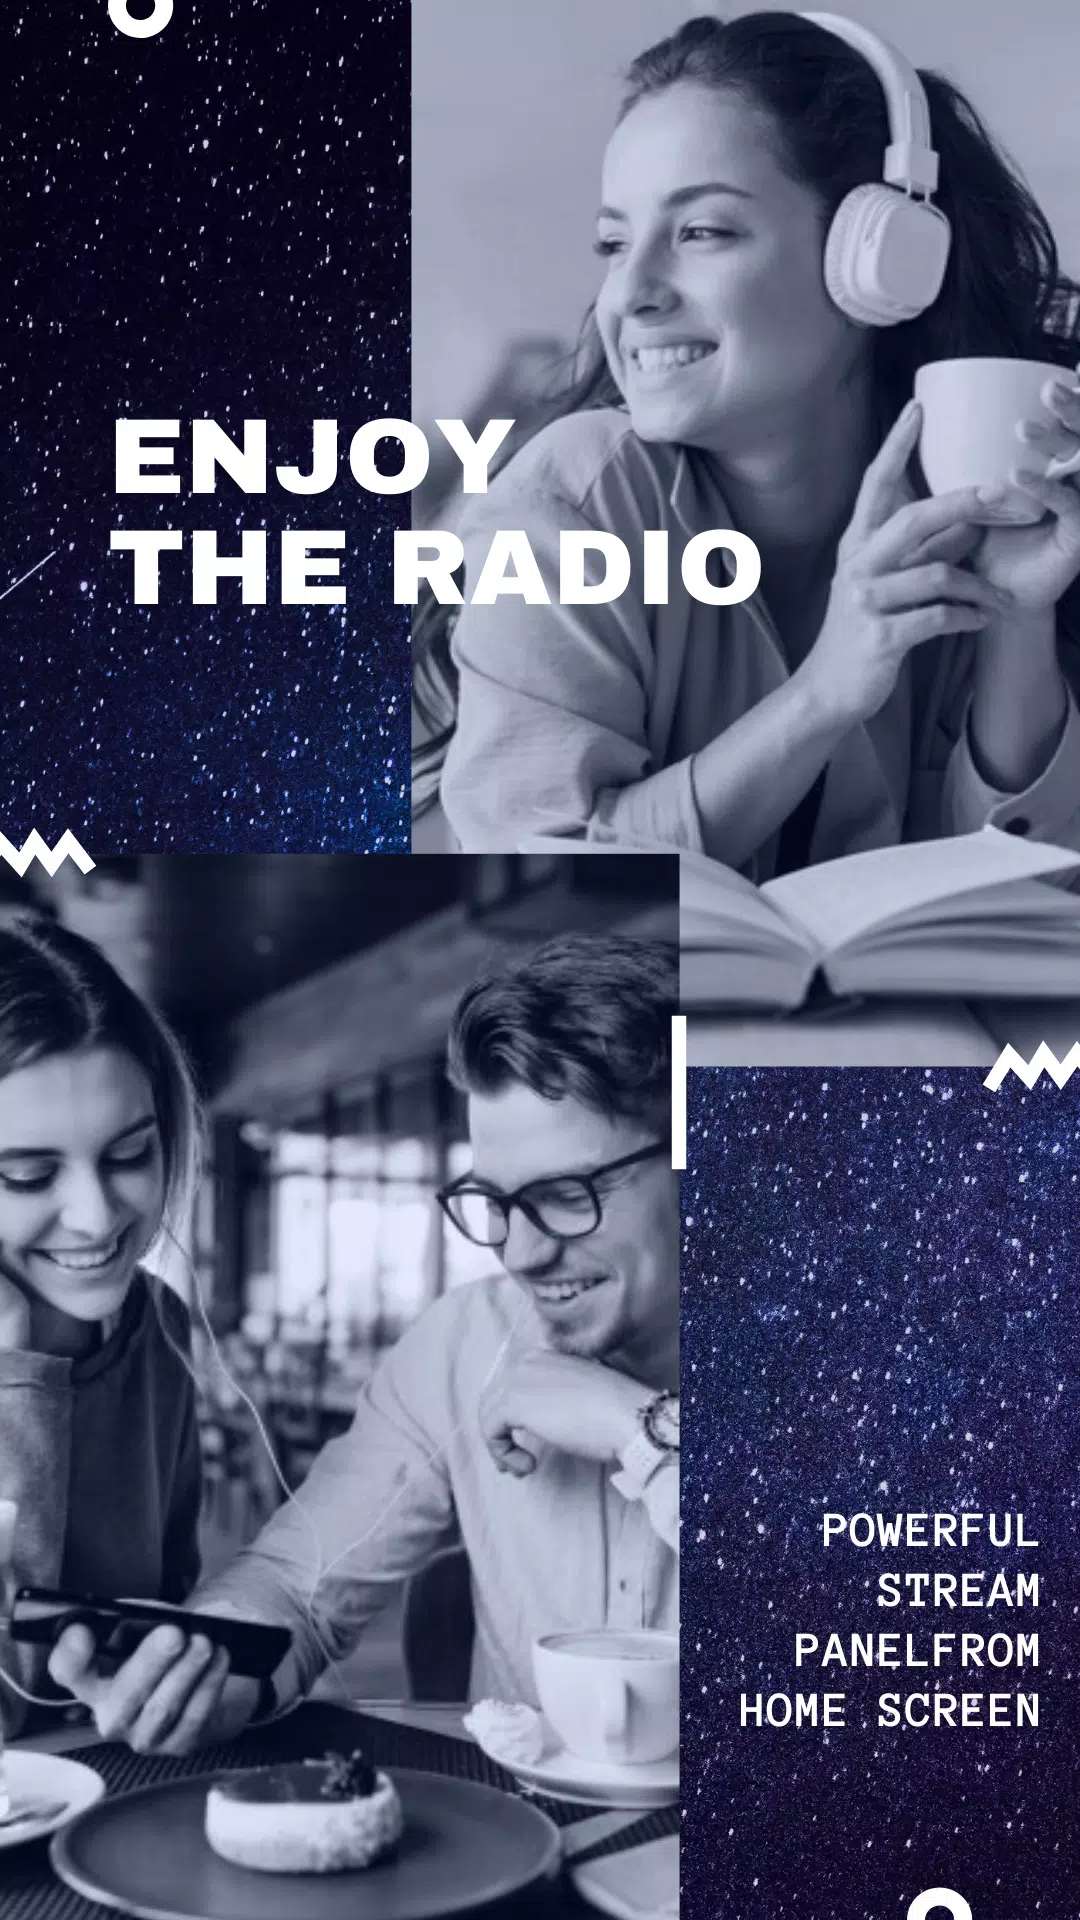 BBC Radio 5 for Android - APK Download